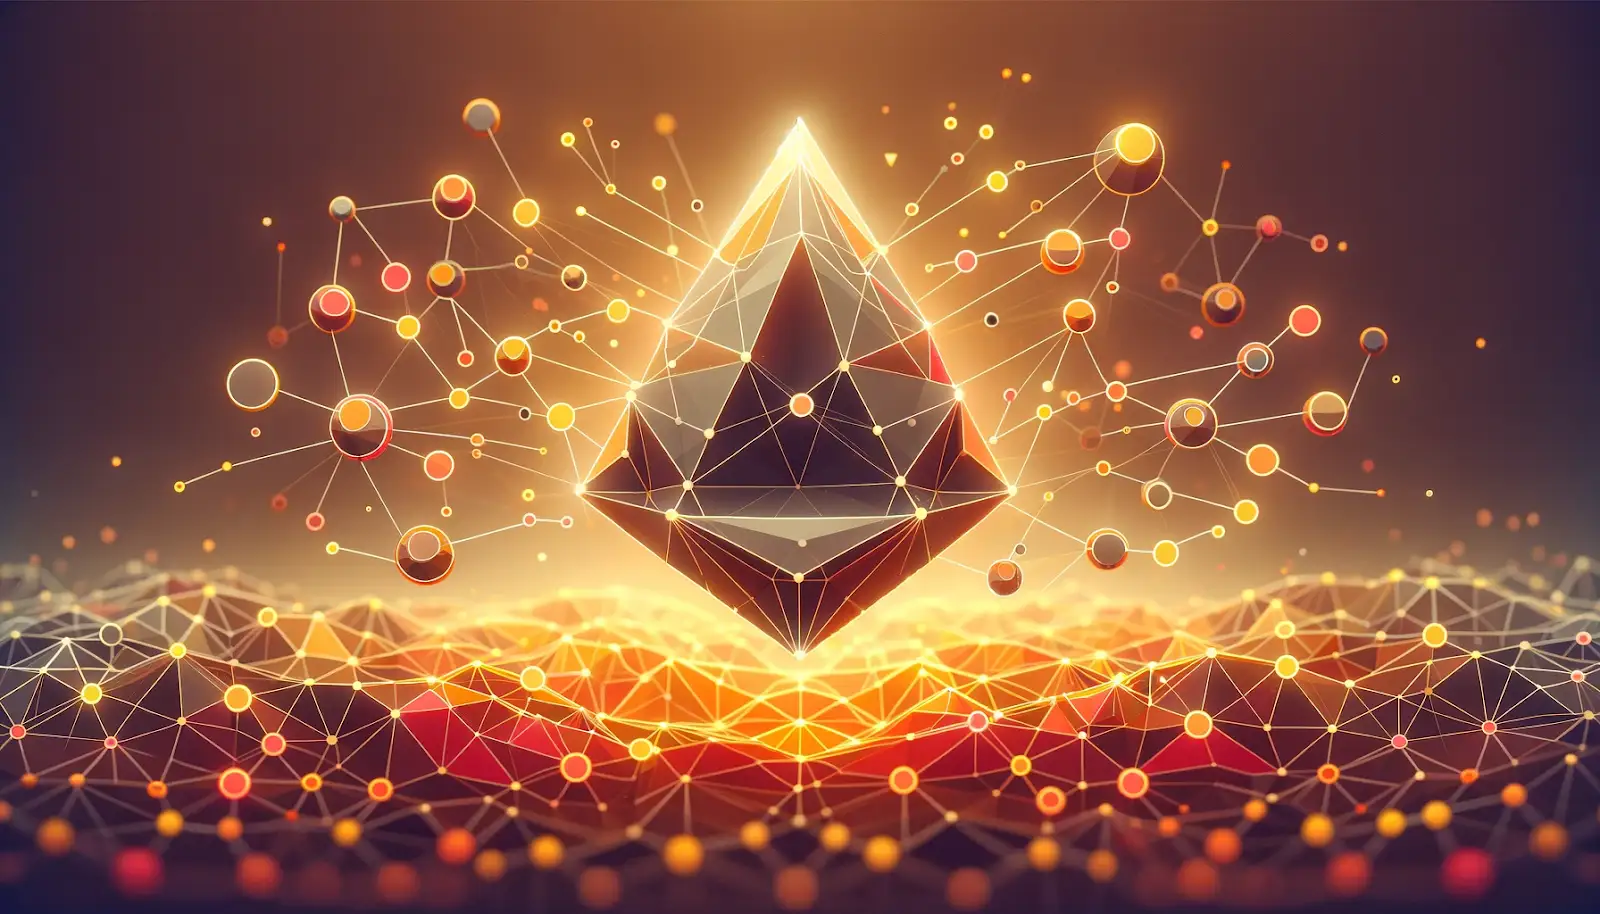 Low poly image of large Ethereum symbol glowing with warm colors along with different nodes connected to it.